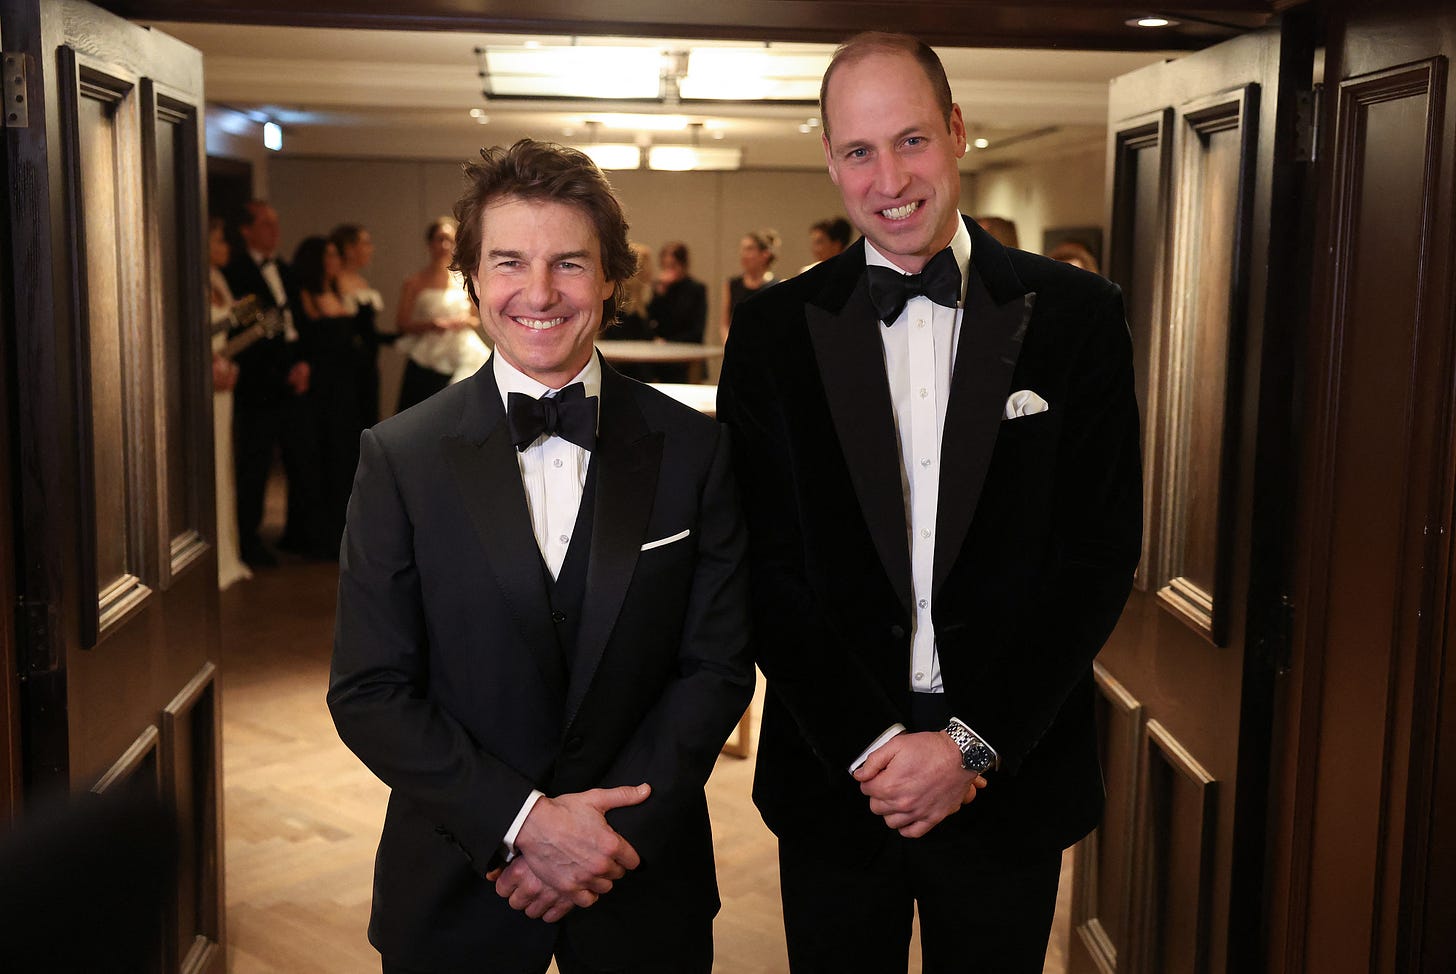 tom cruise poses with prince william at air ambulance event